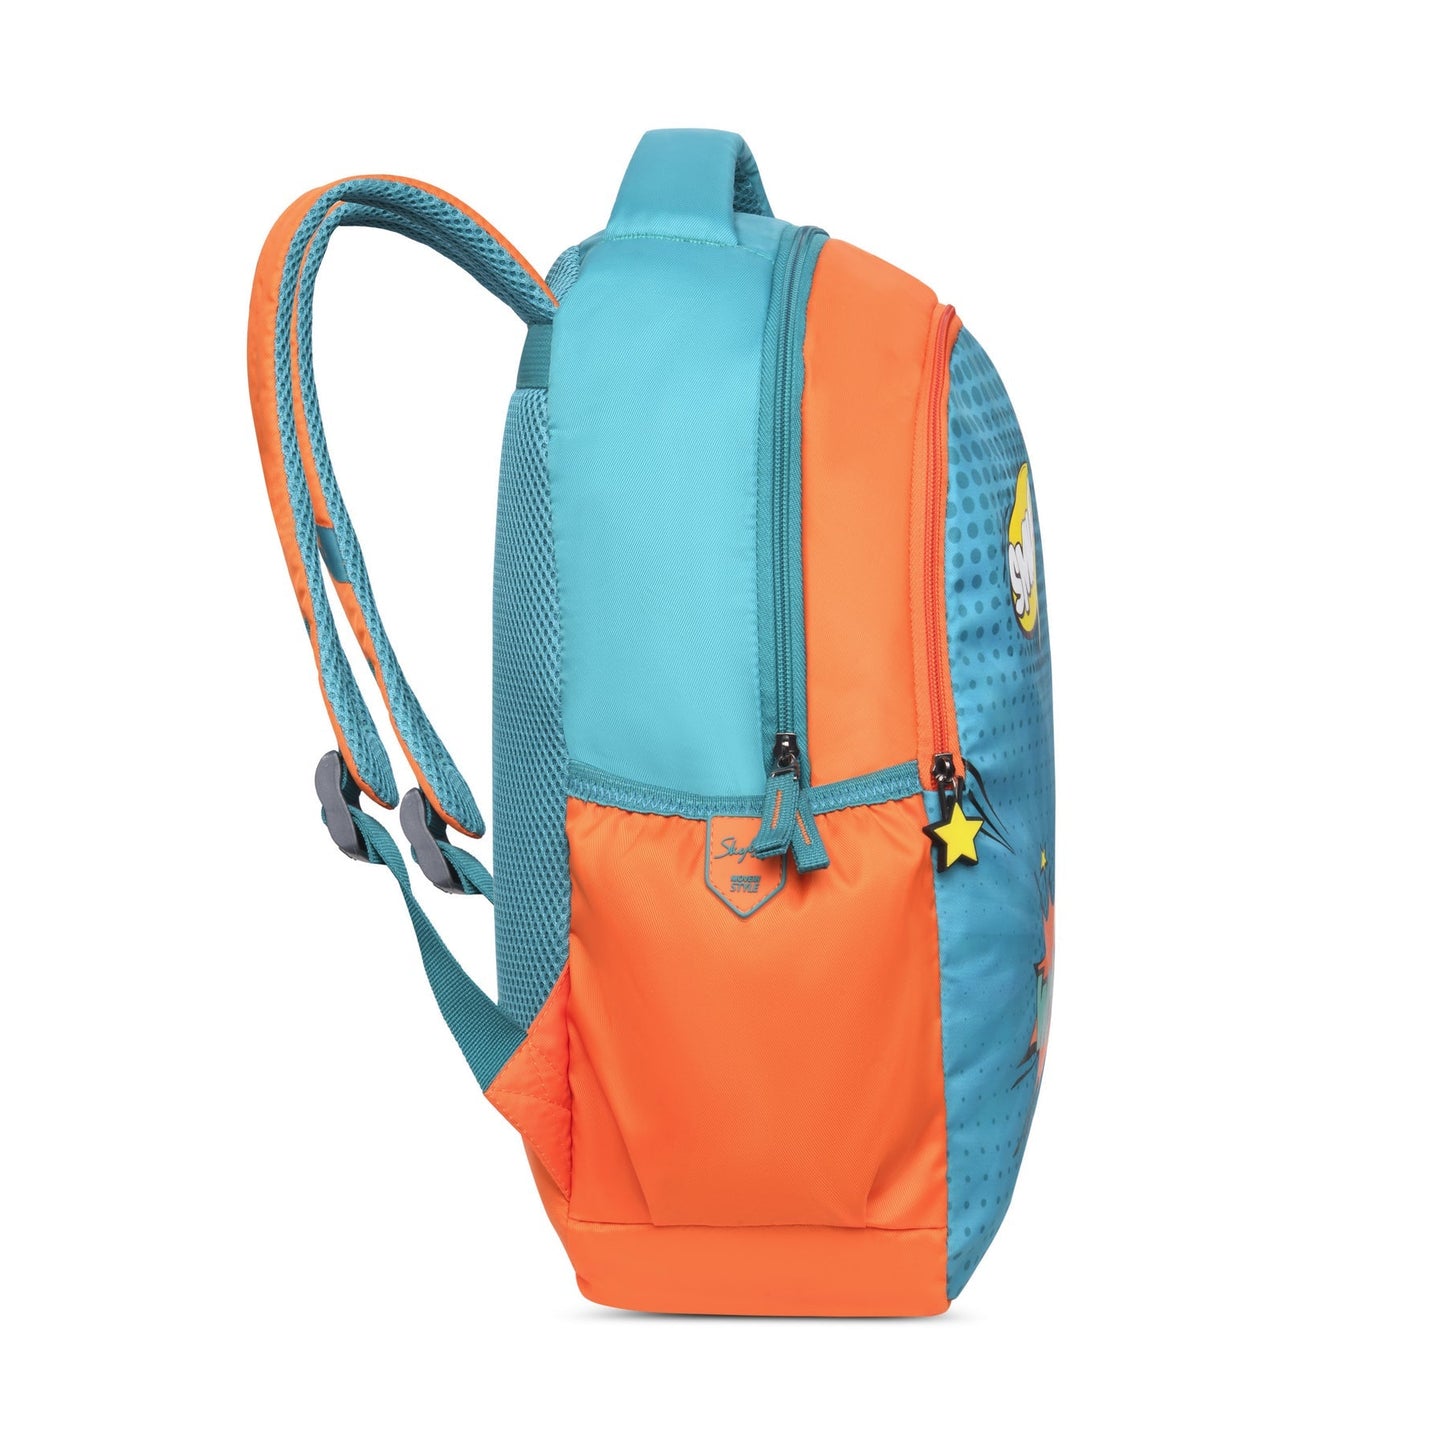 Skybags Bubbles 02 18L Backpack